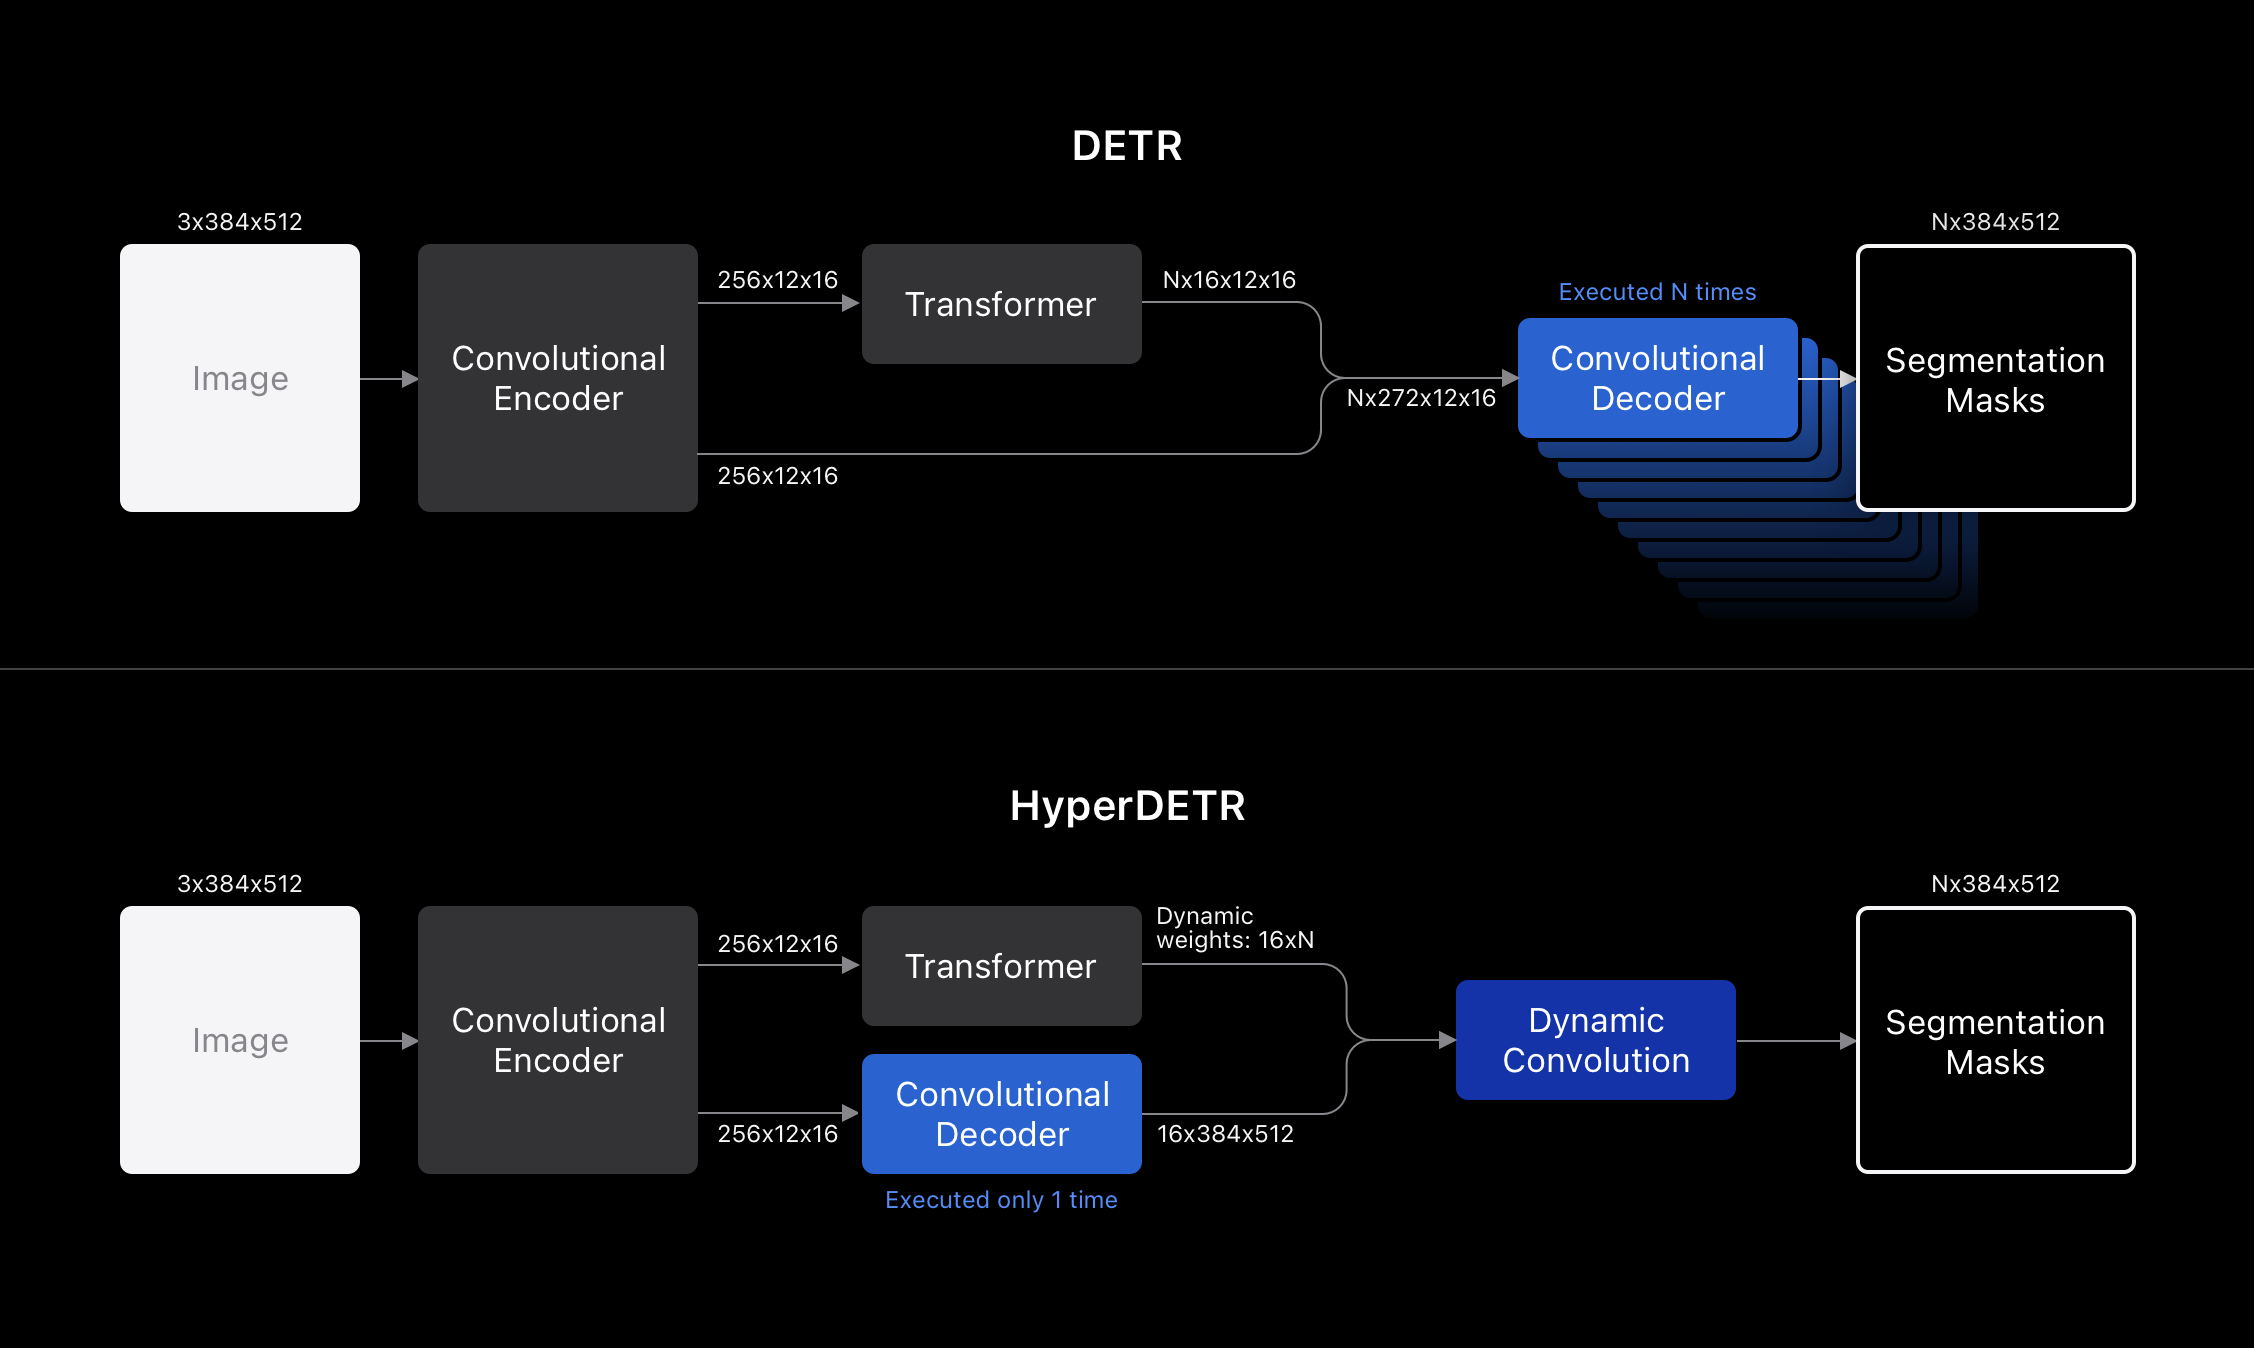 Figure 3: Architecture of DETR and HyperDETR. A simple redesign of DETR alleviates the main computational bottleneck for efficient panoptic segmentation to be executed on-device.